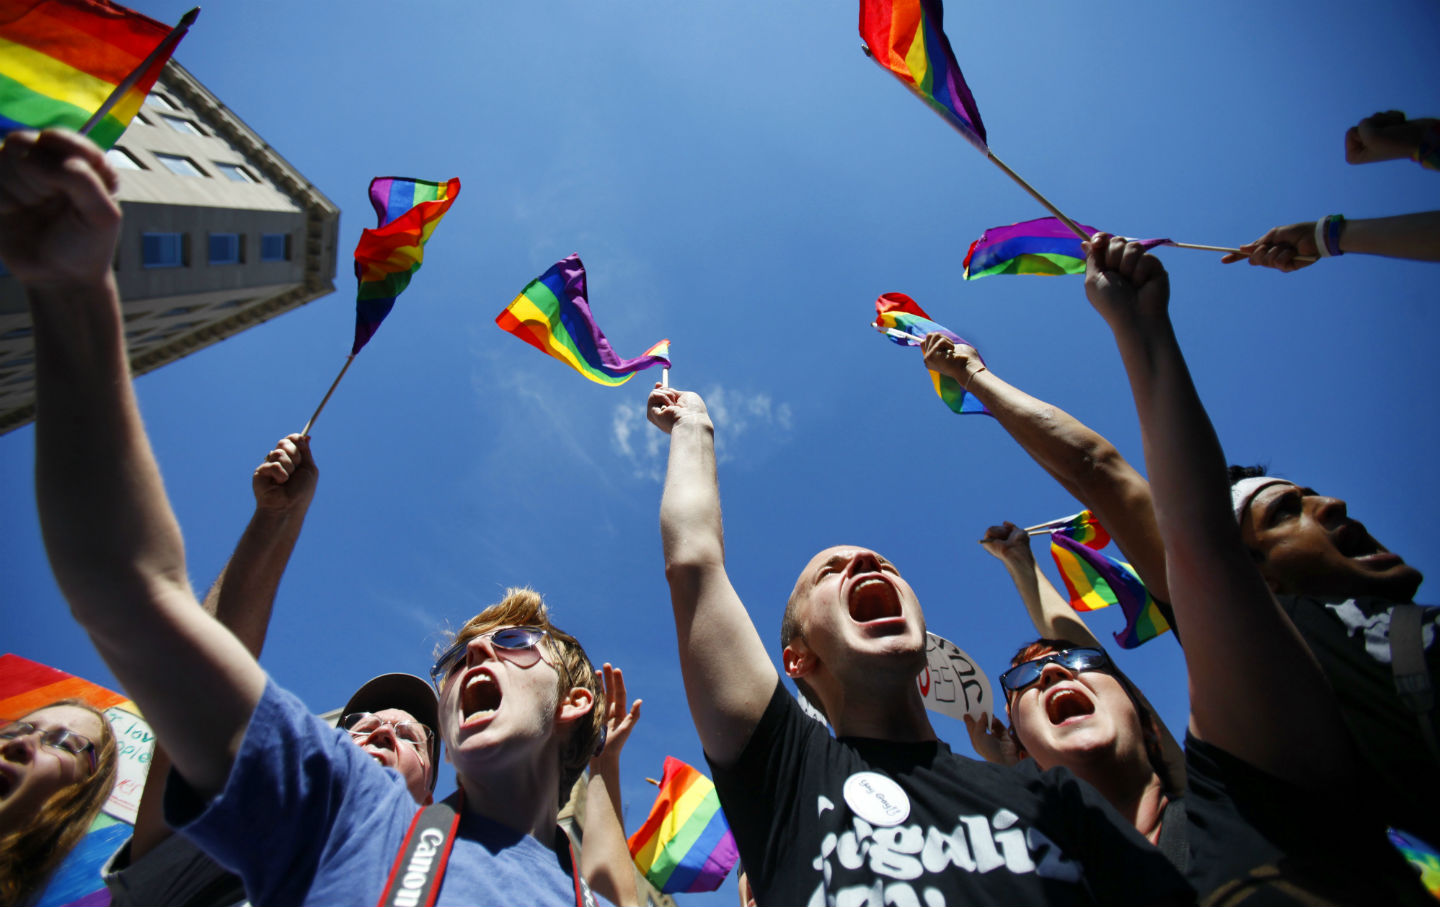 What's Next for the LGBT Movement? | The Nation